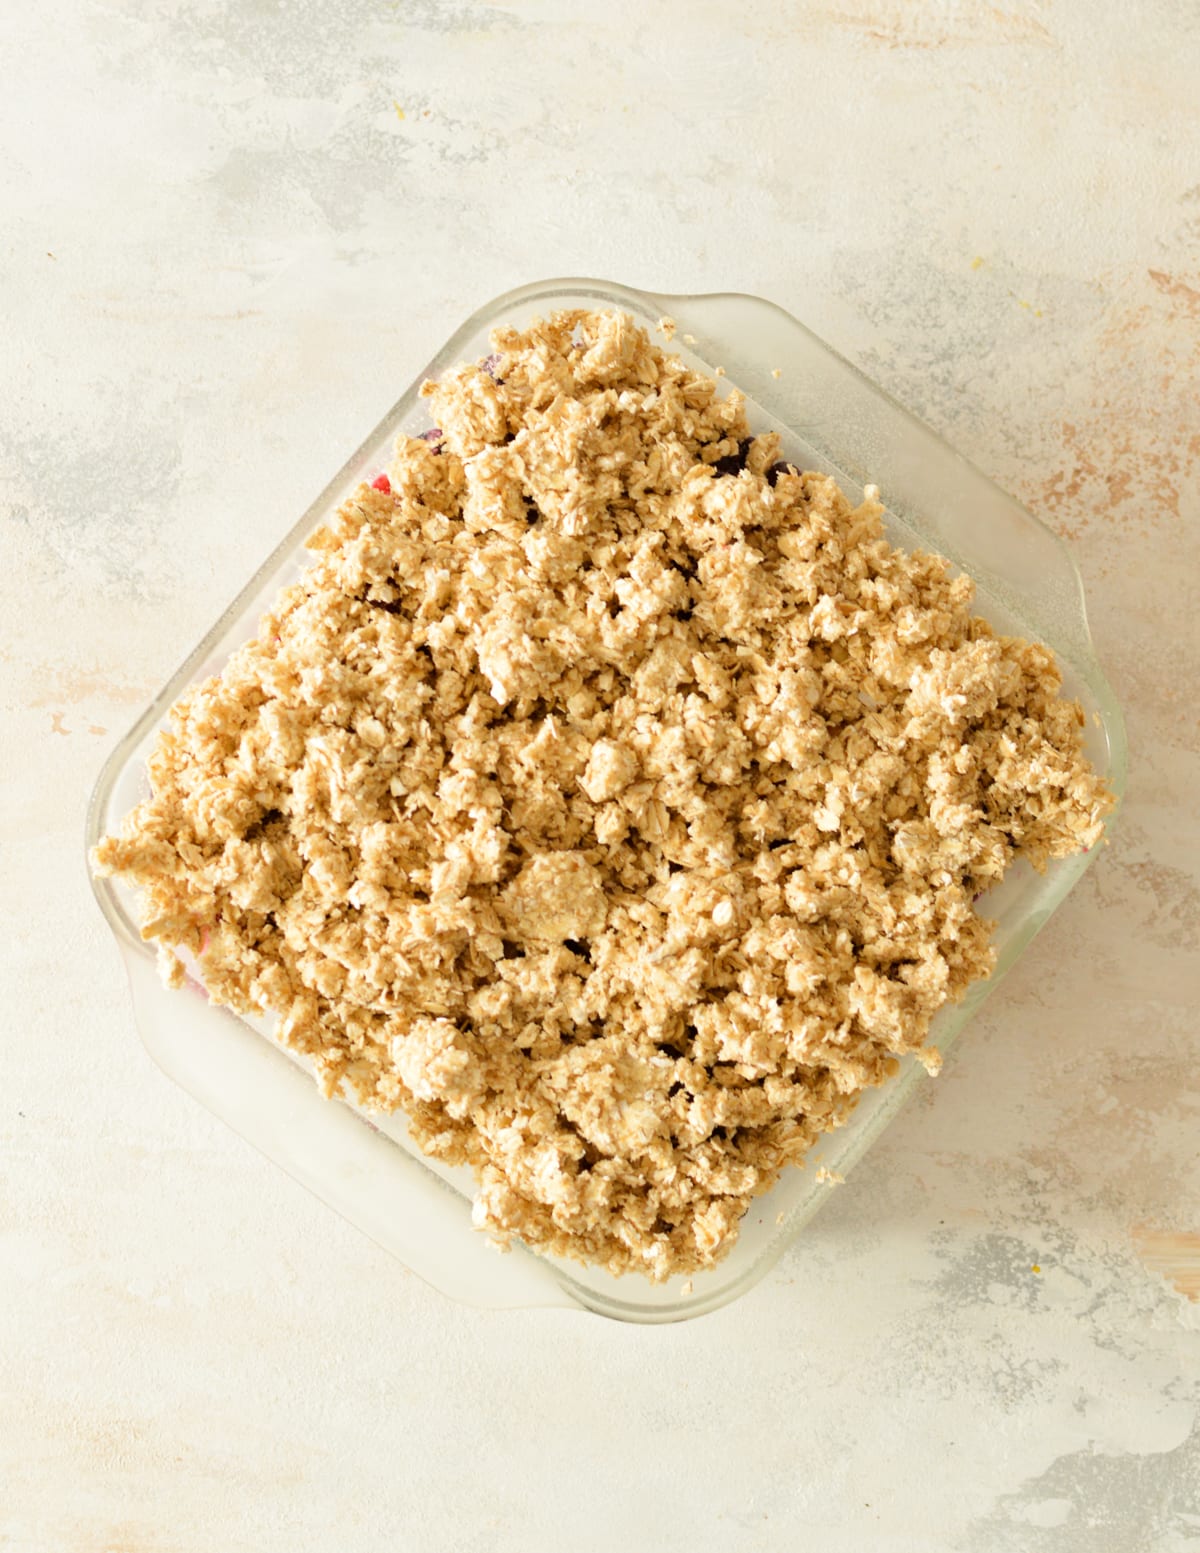 an unbaked berry crisp with an oat crumb topping